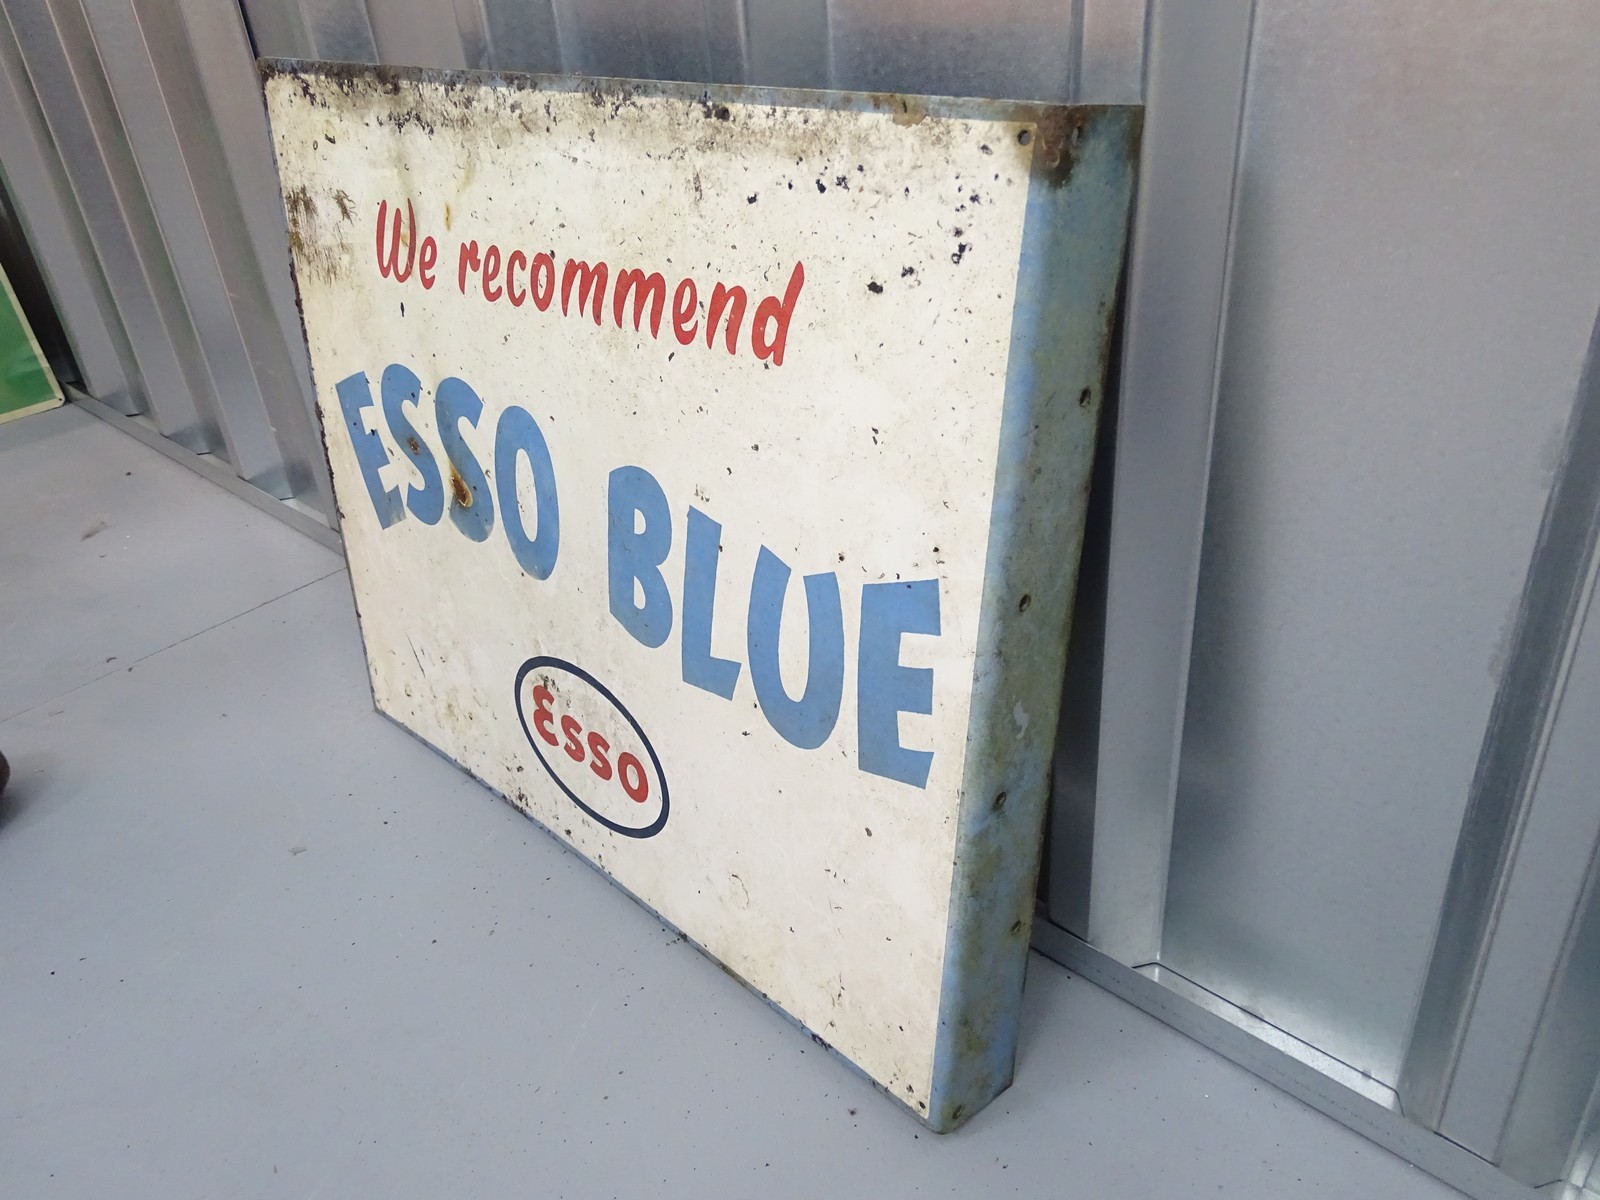 ESSO BLUE (22" x 18") flanged two-sided enamel advertising sign - Image 2 of 3